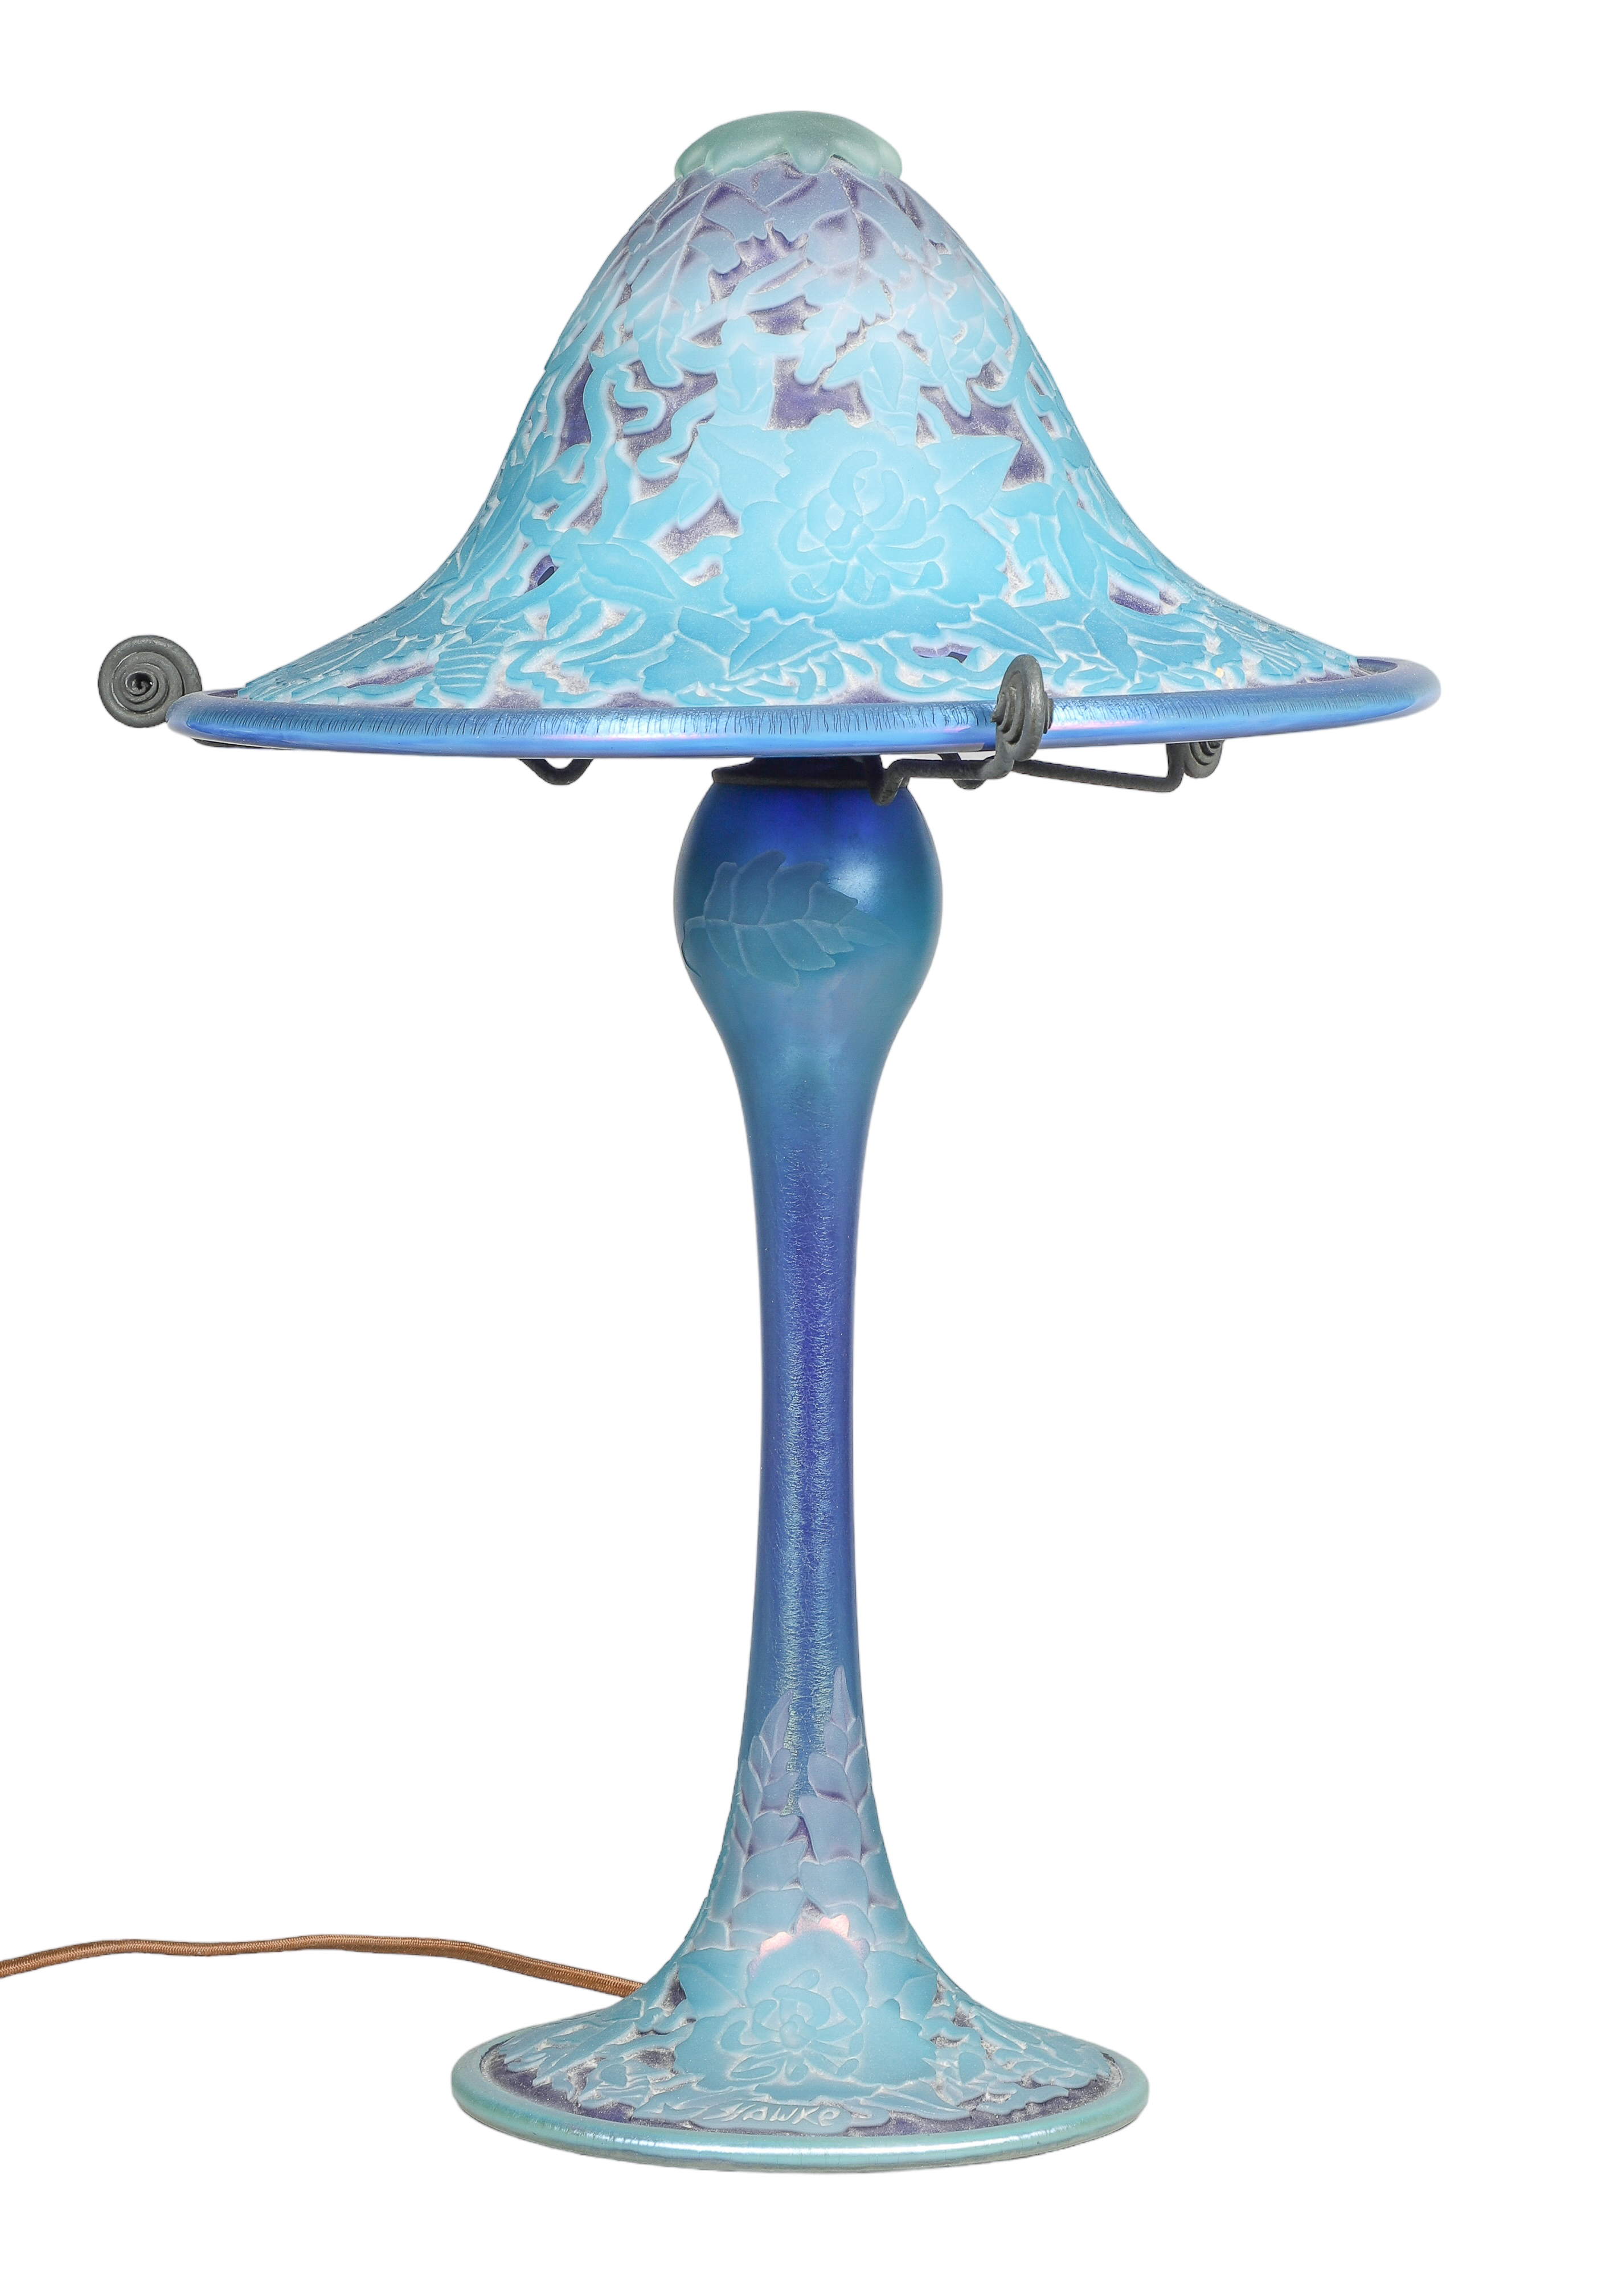 Iridescent cameo glass table lamp, teal